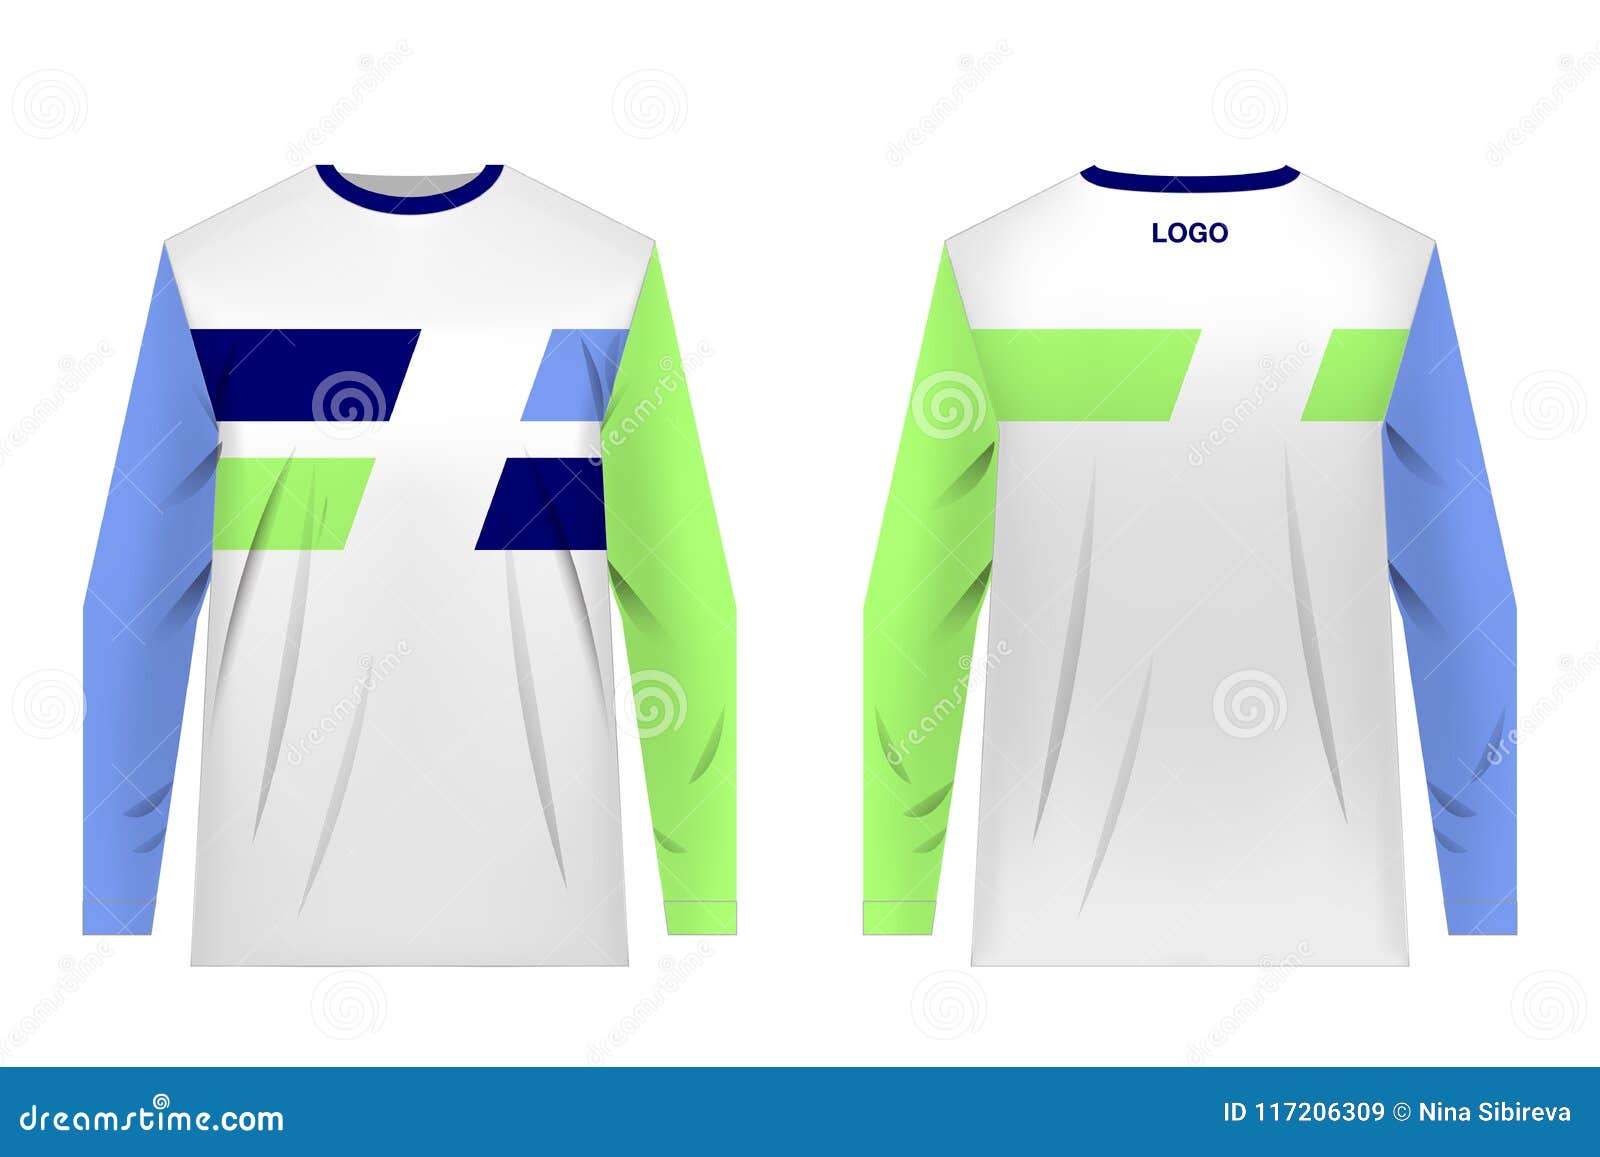 Mtb Jersey Templates Stock Vector Illustration Of Casual 117206309